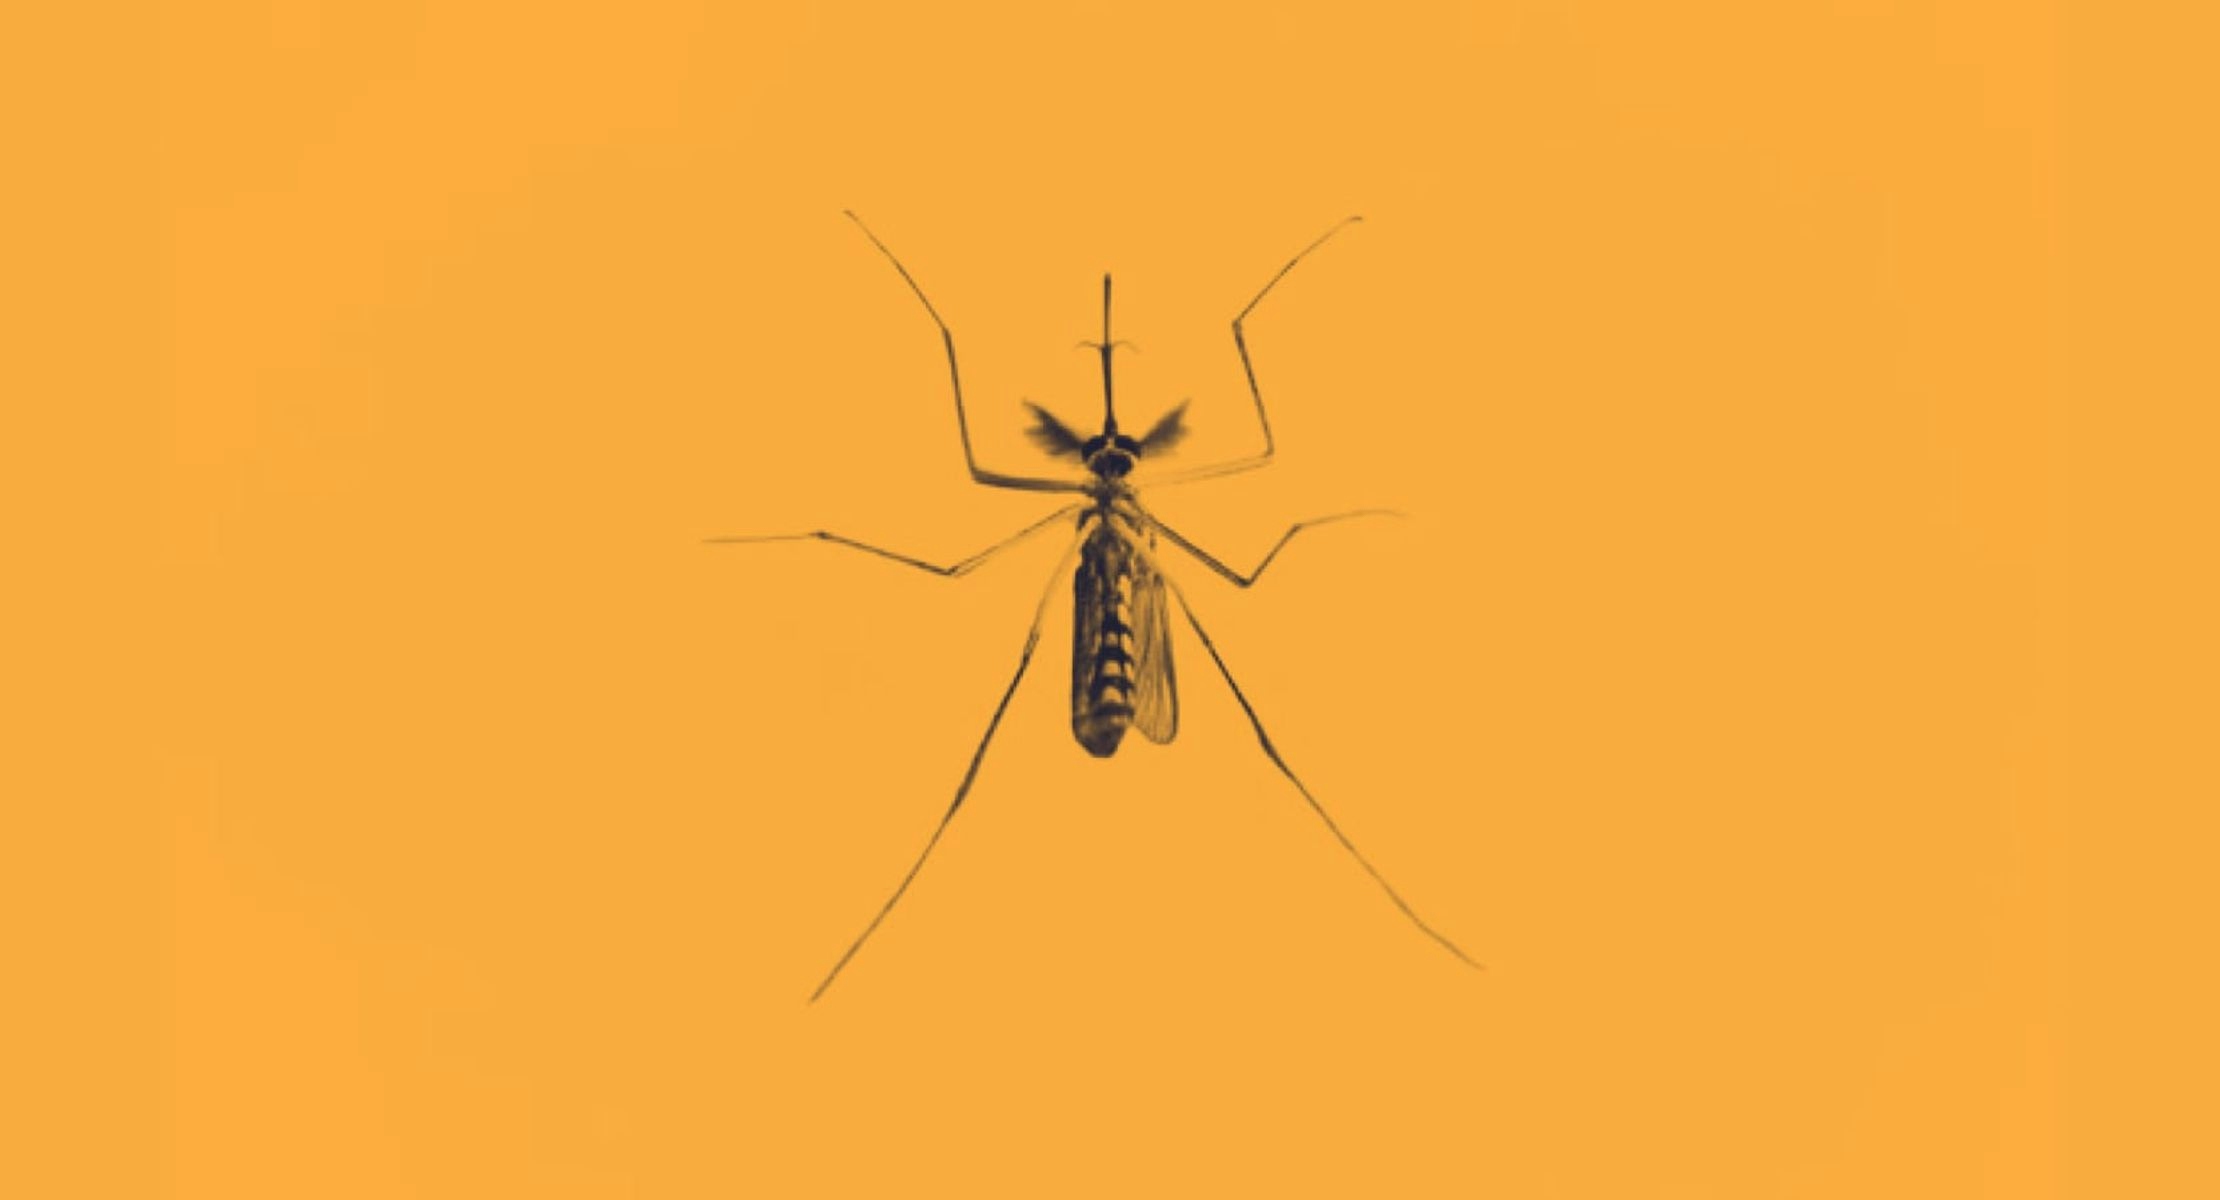 A close up image of a mosquito that sits in the centre of a plain orange background.